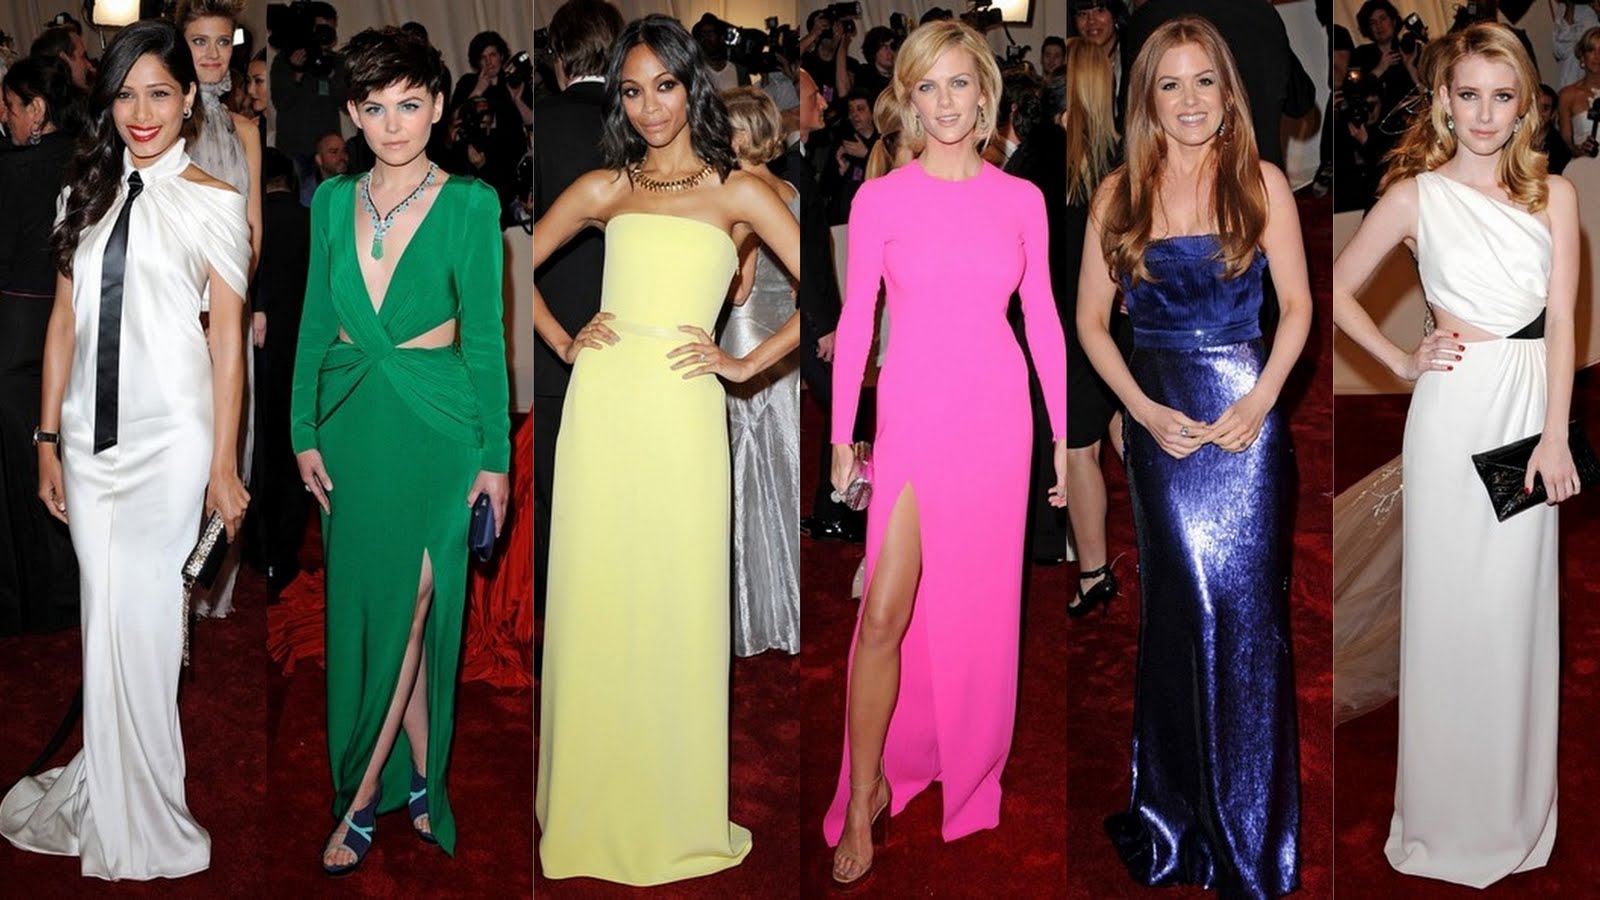 Frills and Thrills: Divas and Darlings - The Met Gala 2011